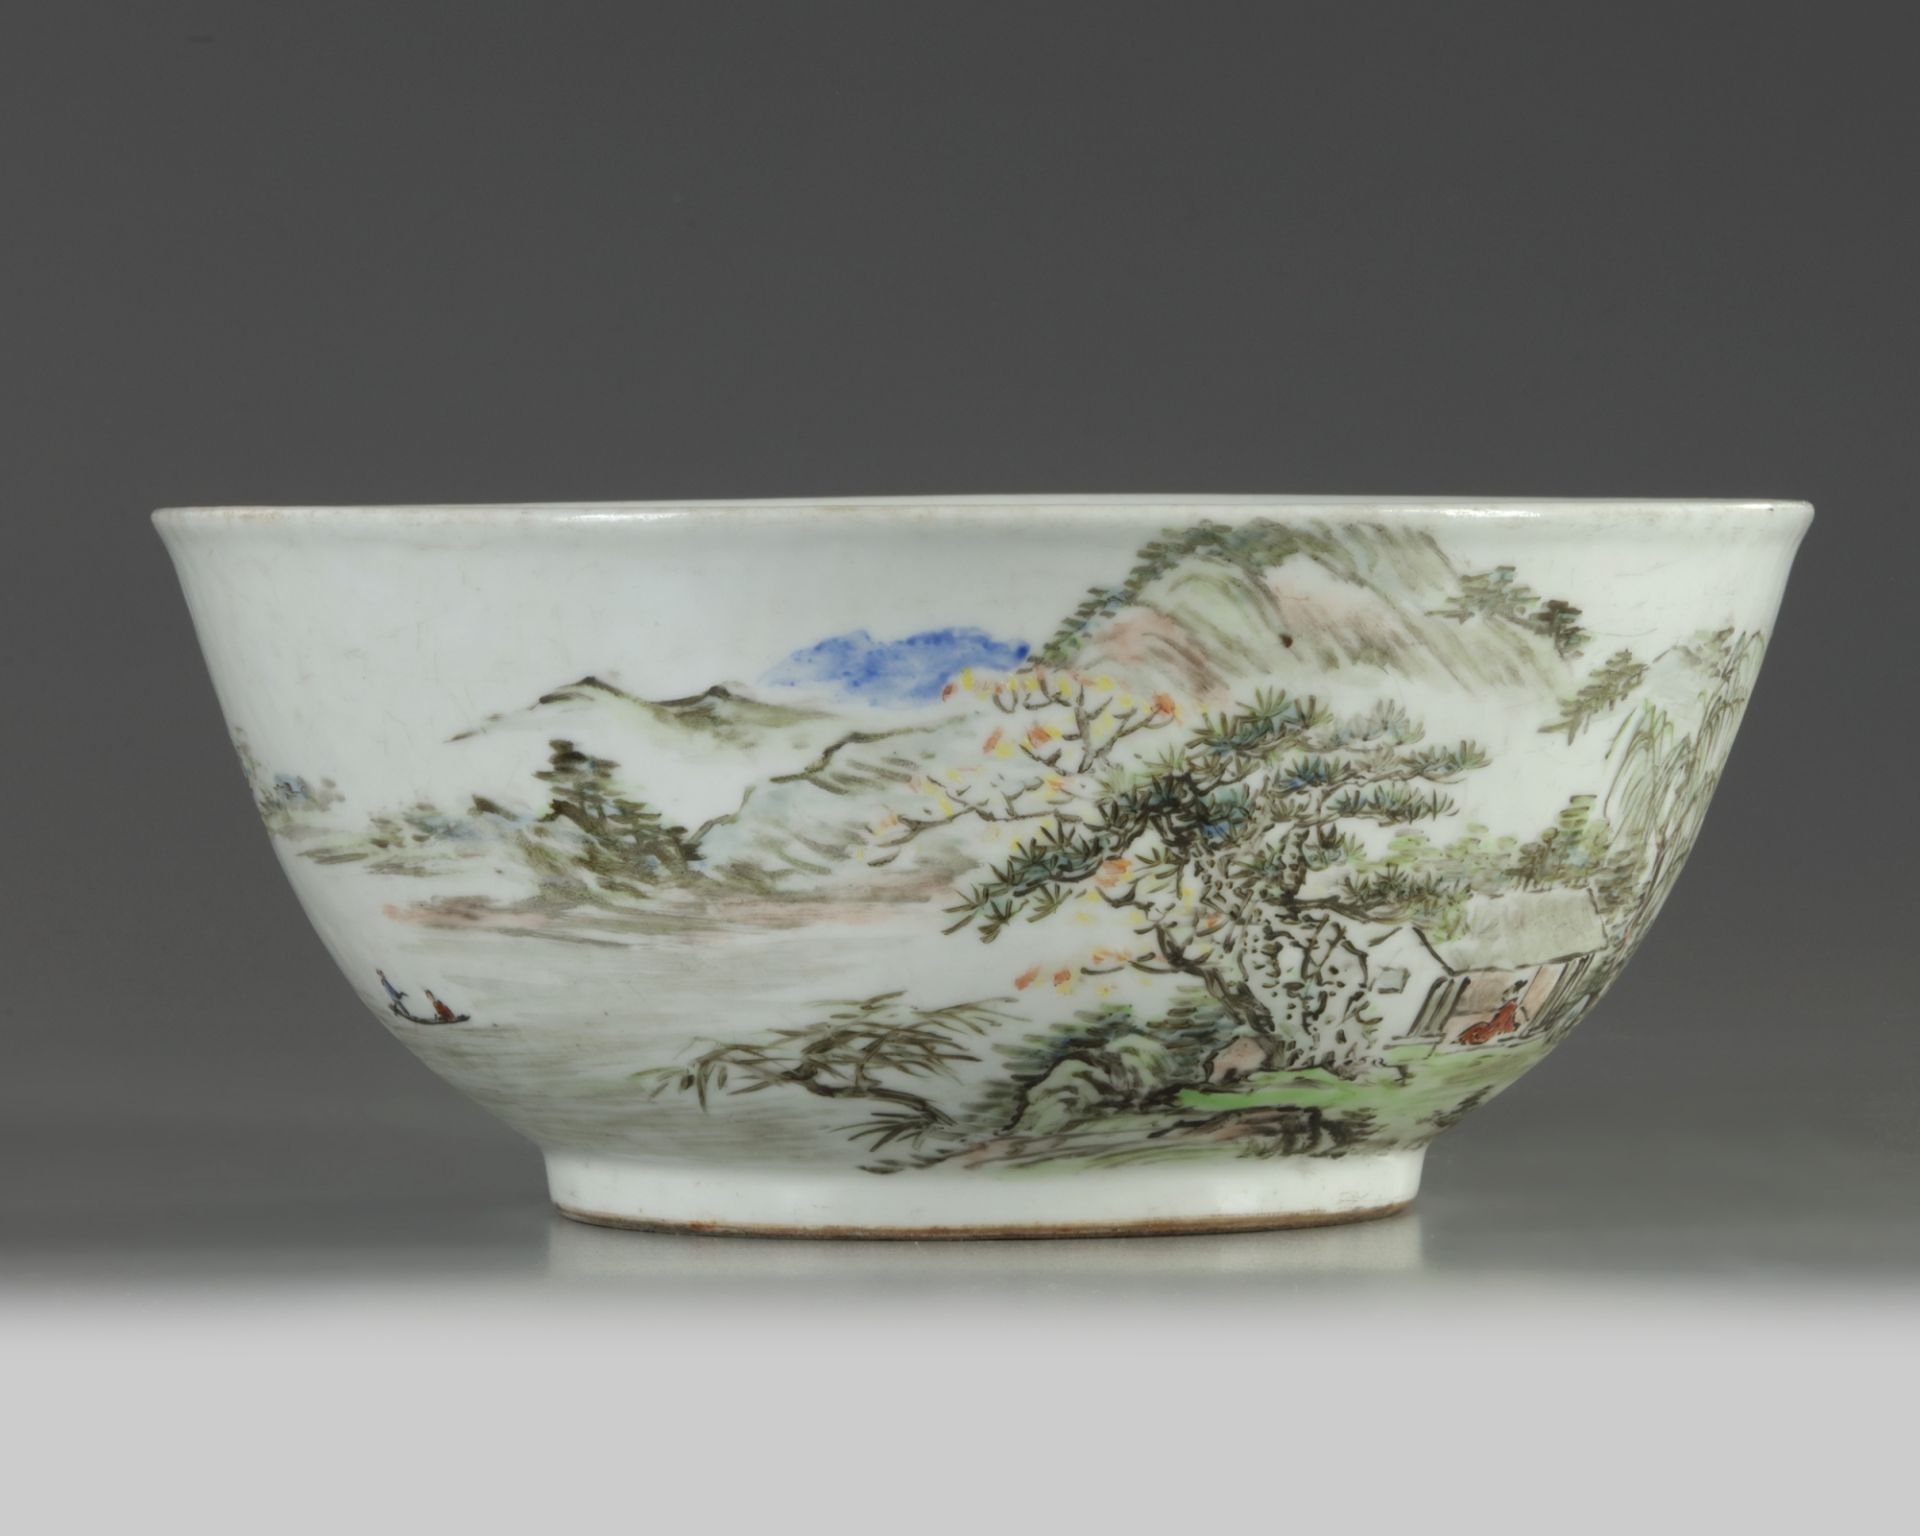 A large Chinese Qianjiang-style bowl